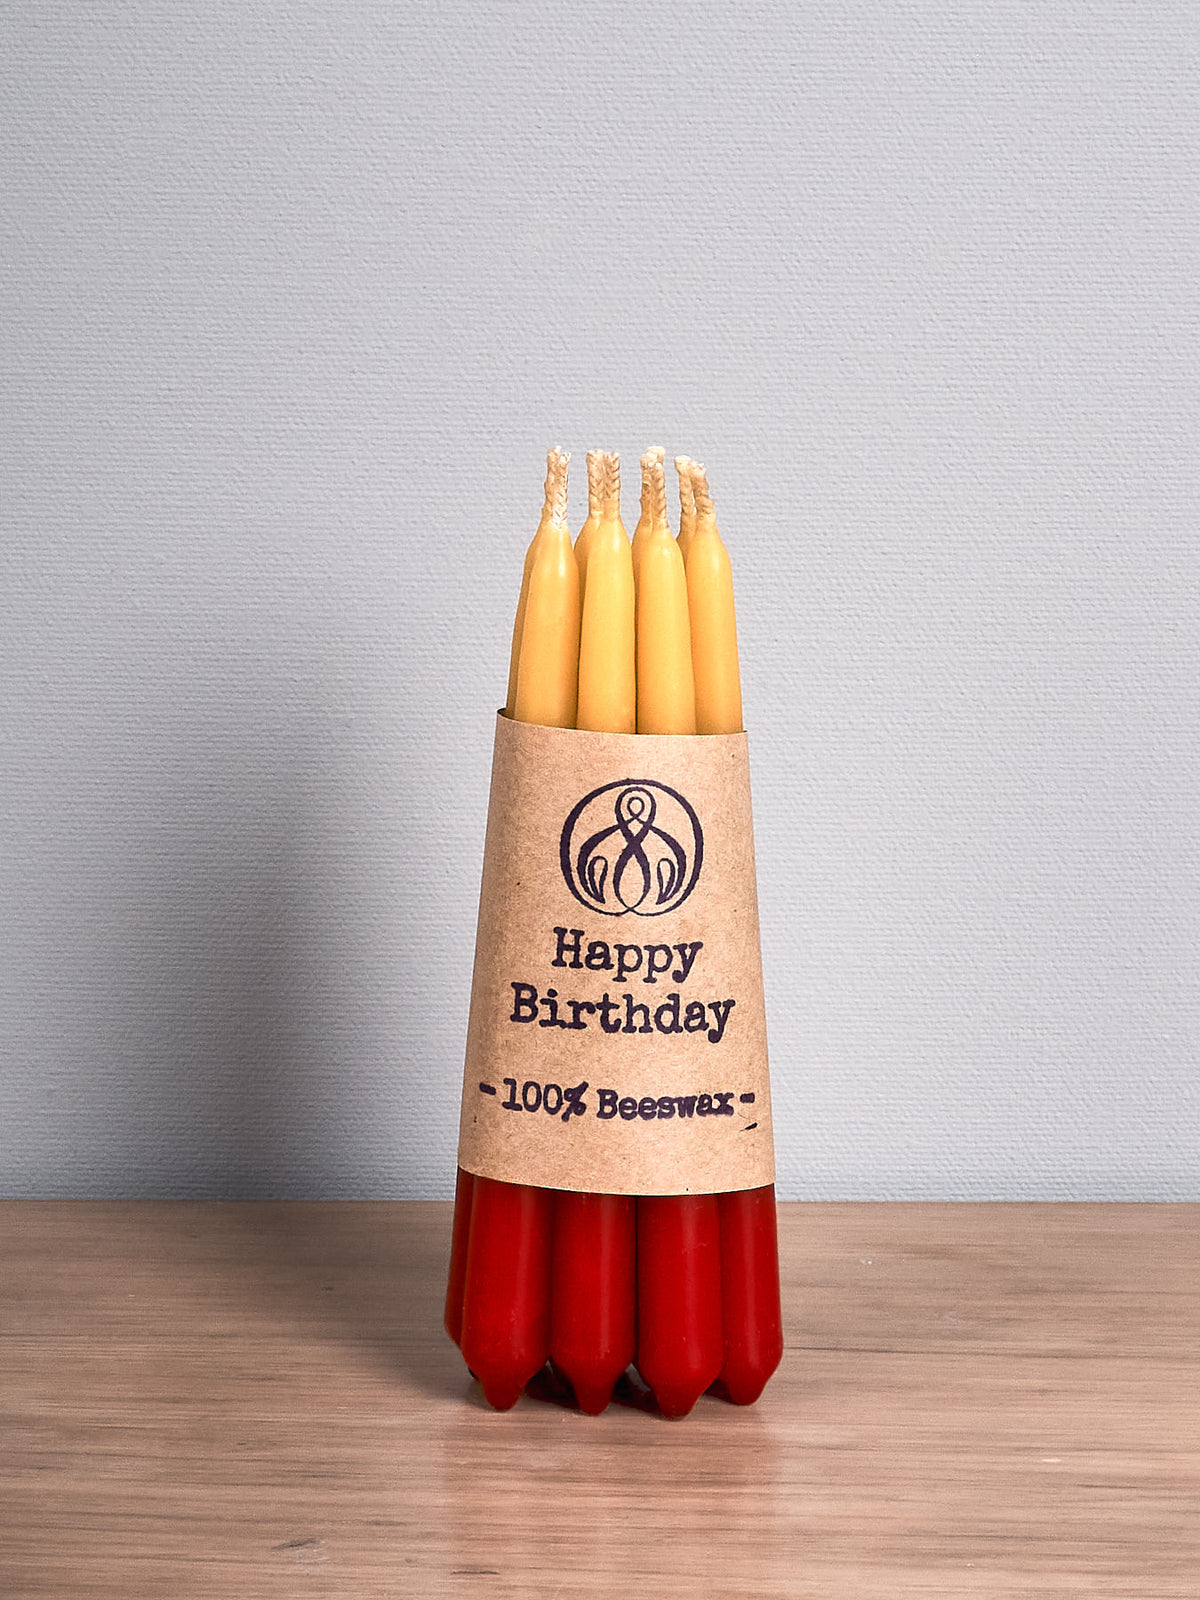 A Hohepa Candles Birthday Candles Set - Red, Orange &amp; Yellow on a wooden table.